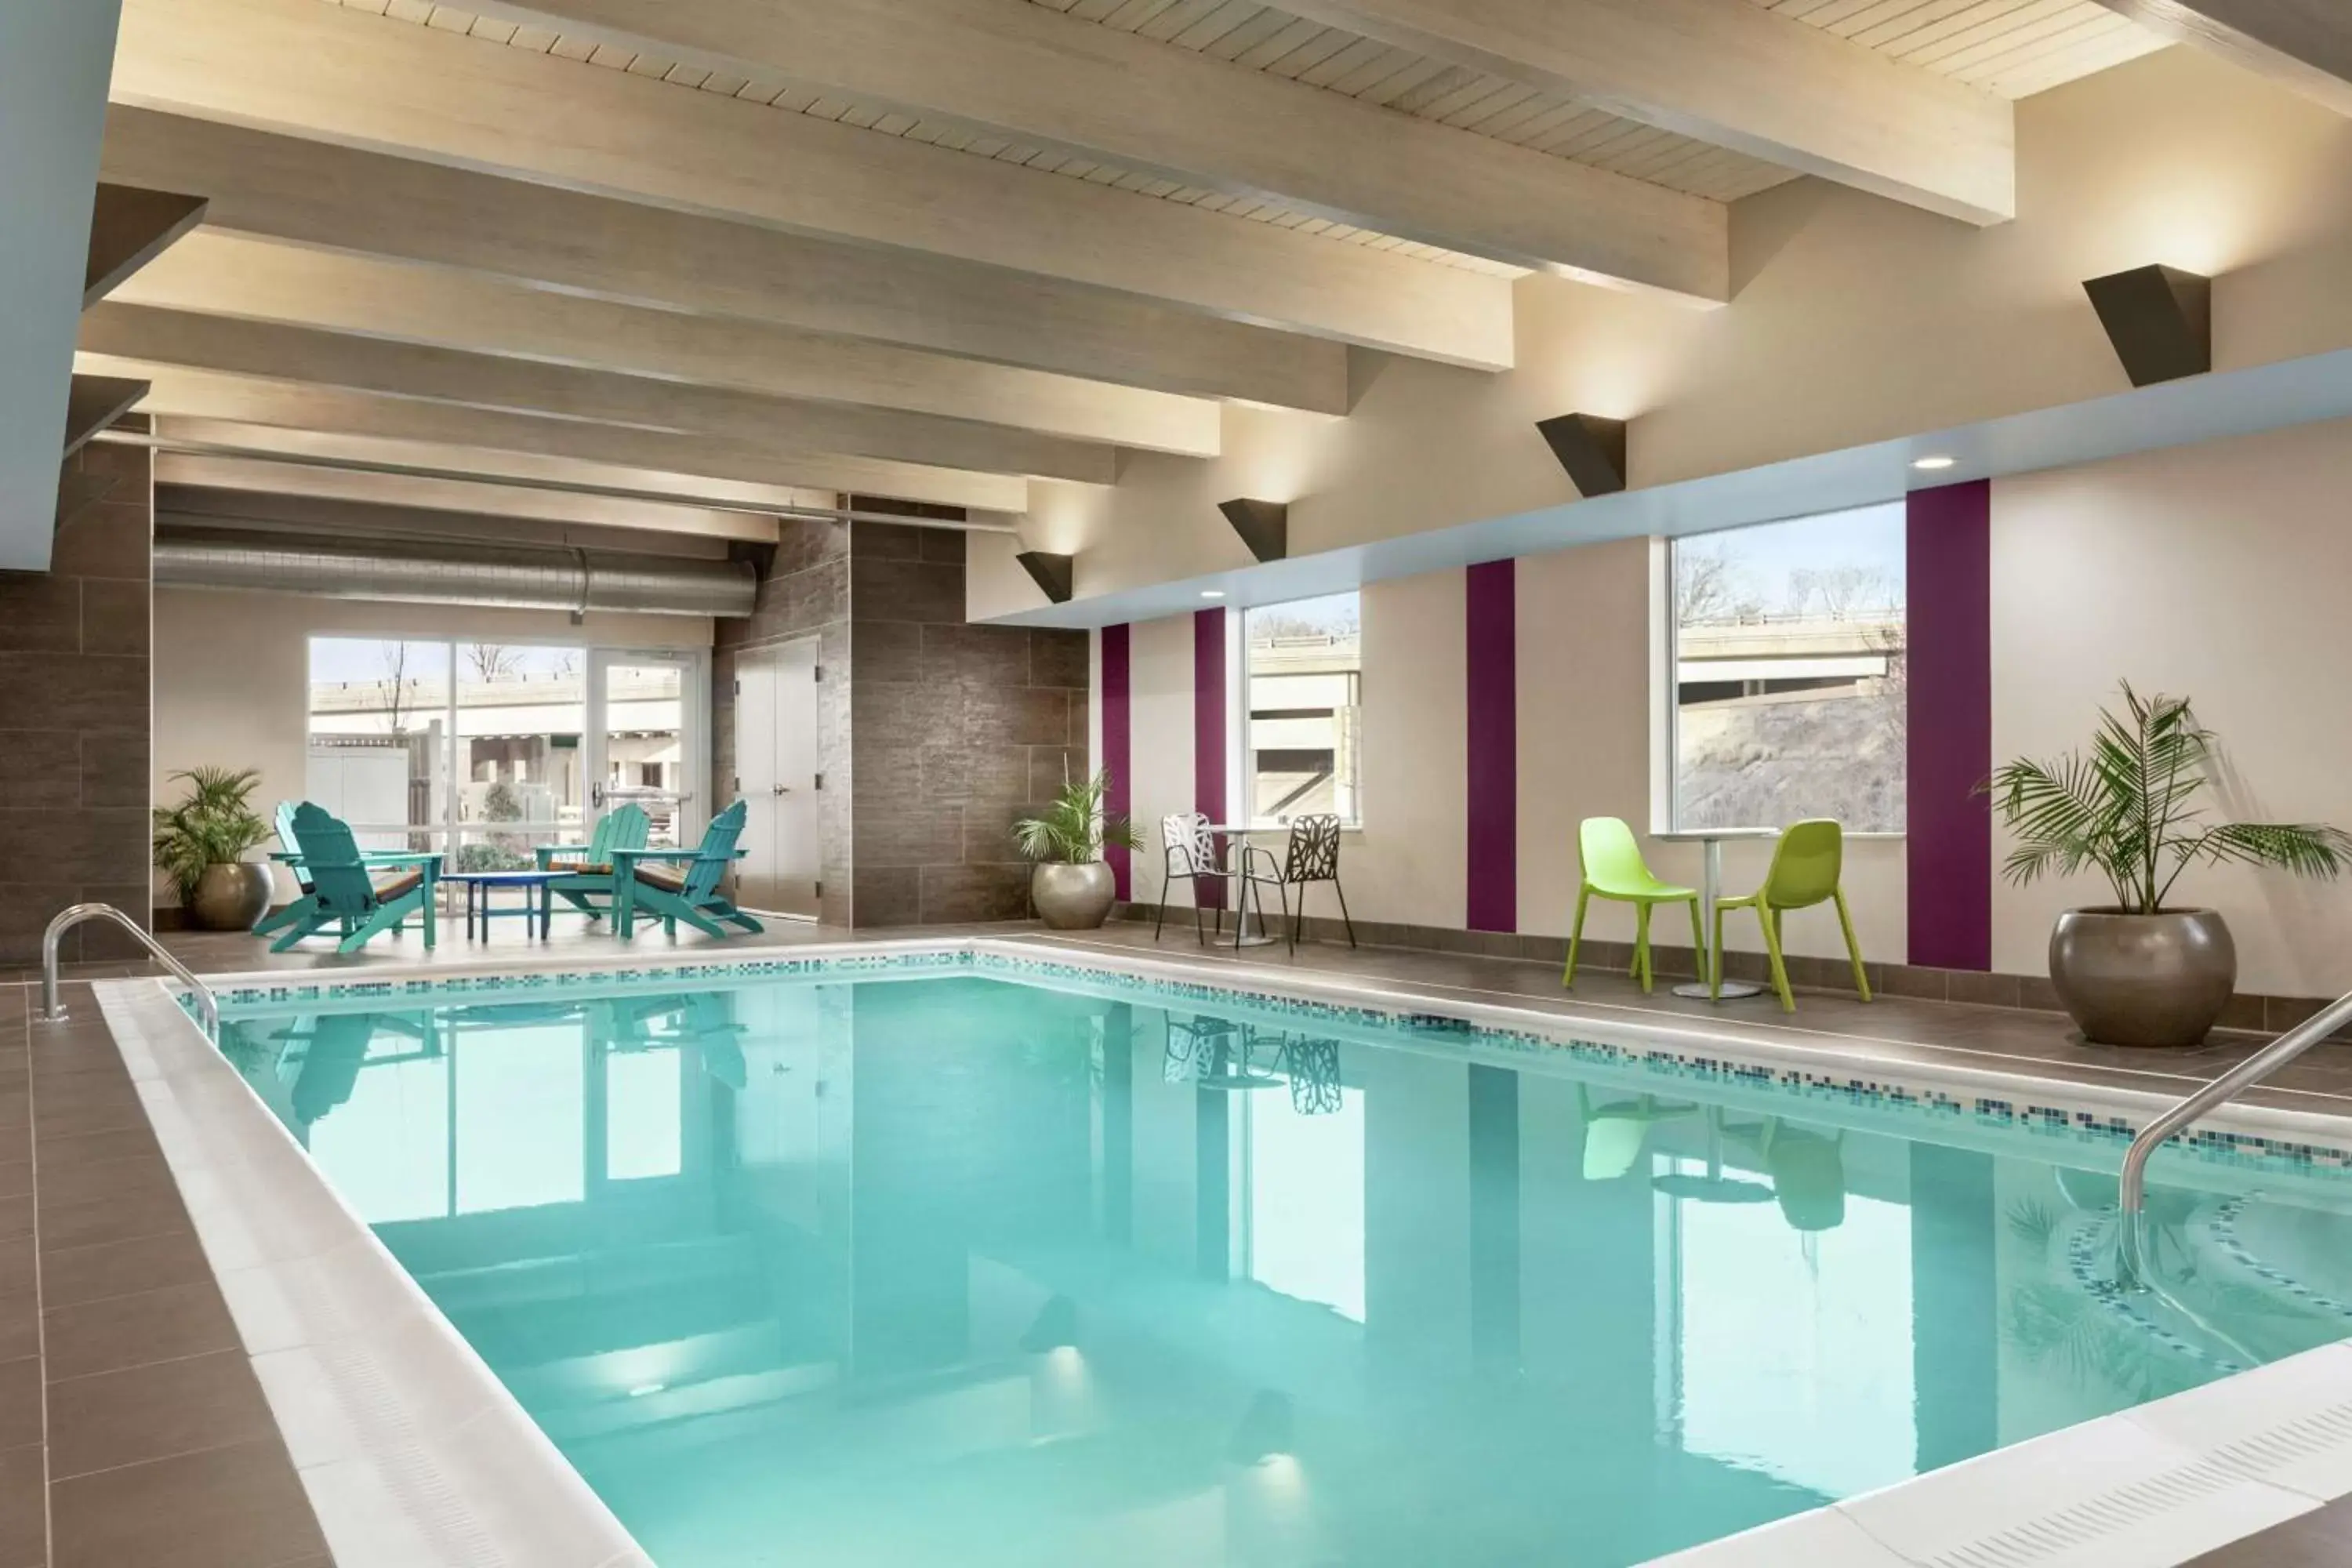 Swimming Pool in Home2 Suites By Hilton Ridley Park Philadelphia Airport So